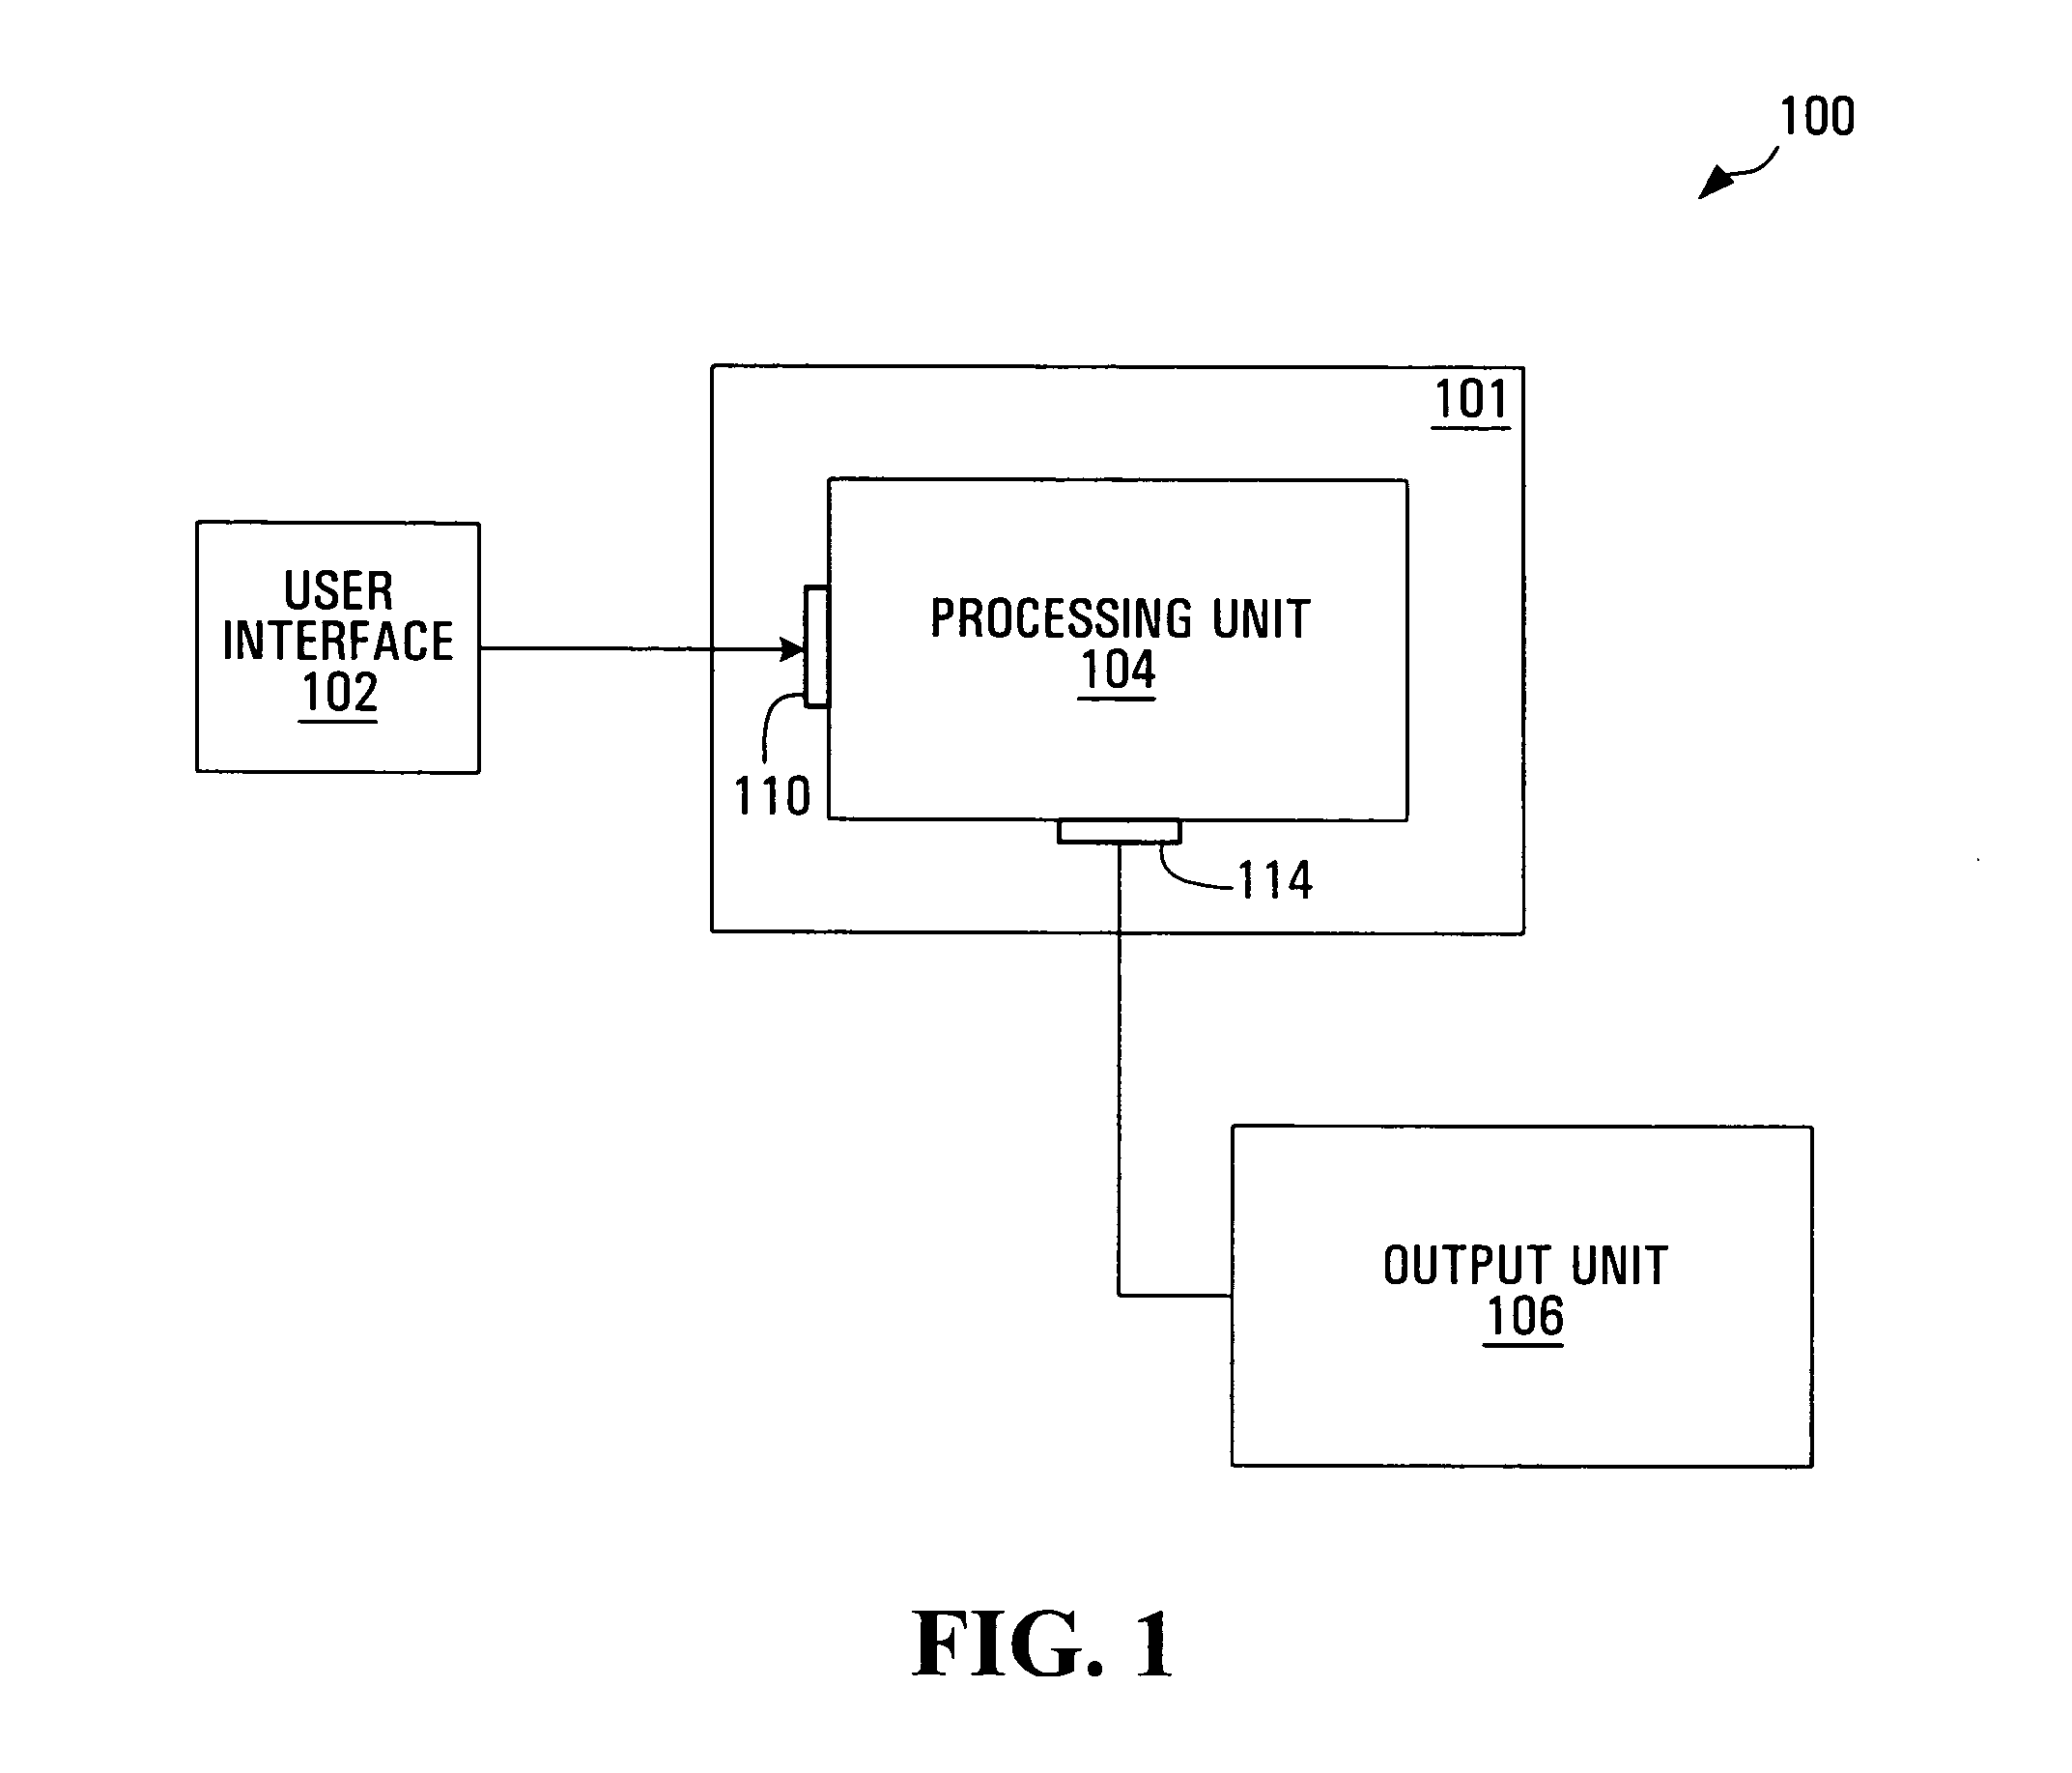 Method and apparatus for providing information related to labor progress for an obstetrics patient